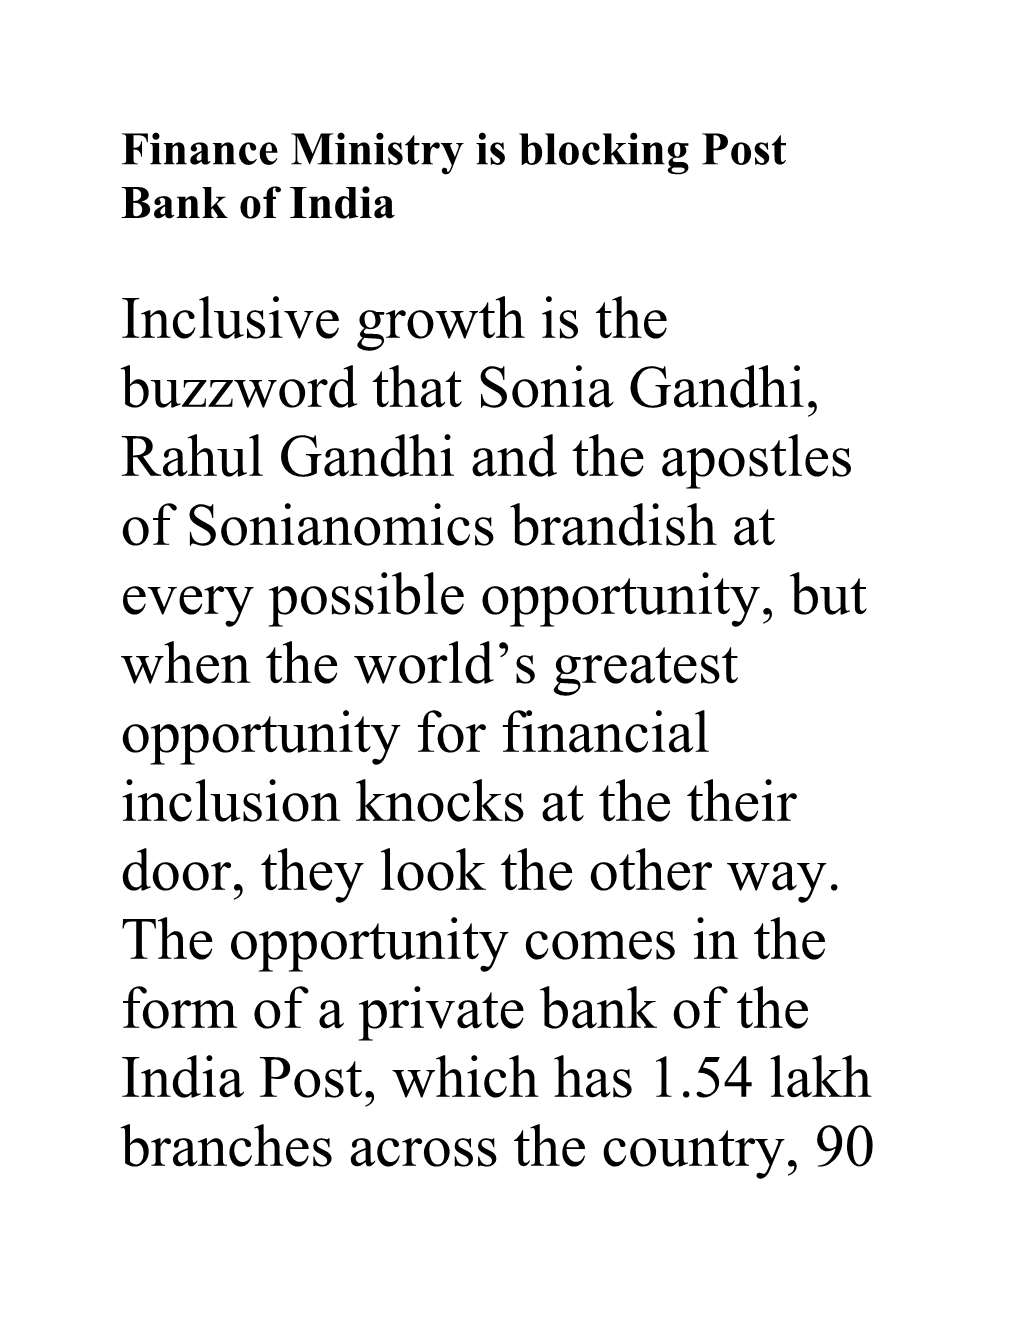 Finance Ministry Is Blocking Post Bank of India Inclusive Growth Is the Buzzword That